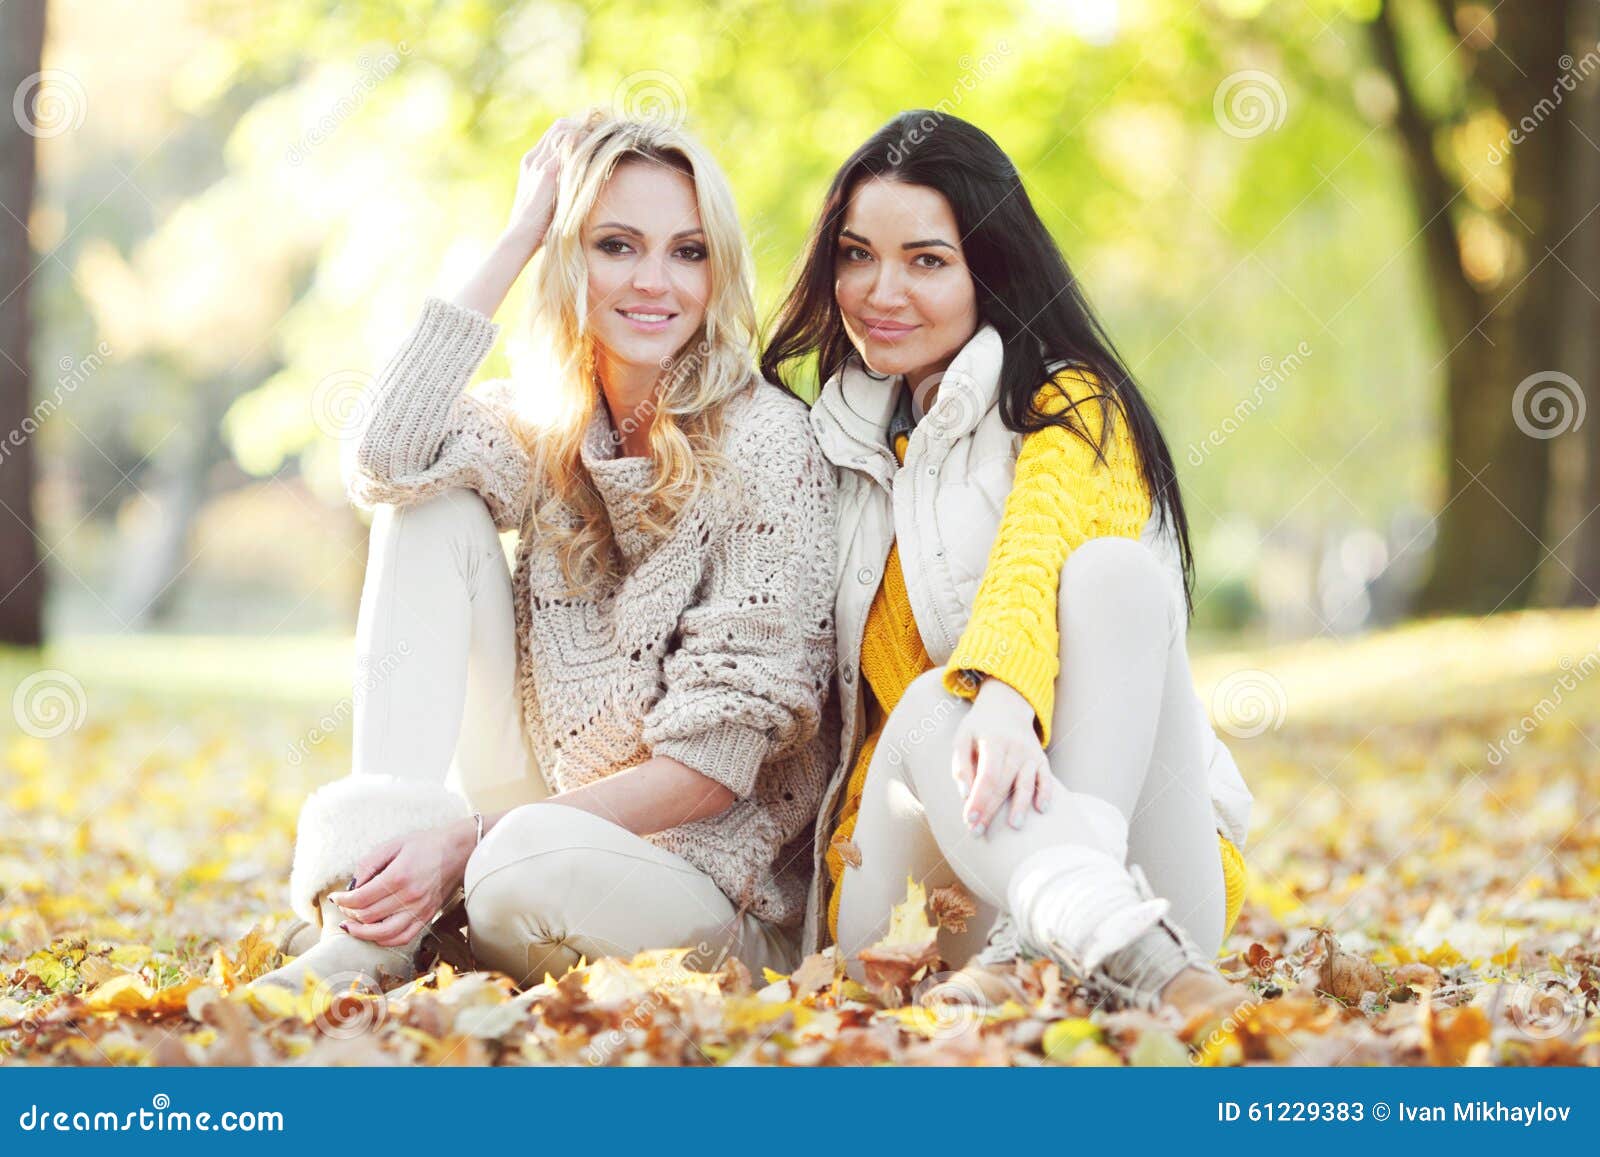 Friends in autumn park stock image. Image of nature, lifestyle - 61229383